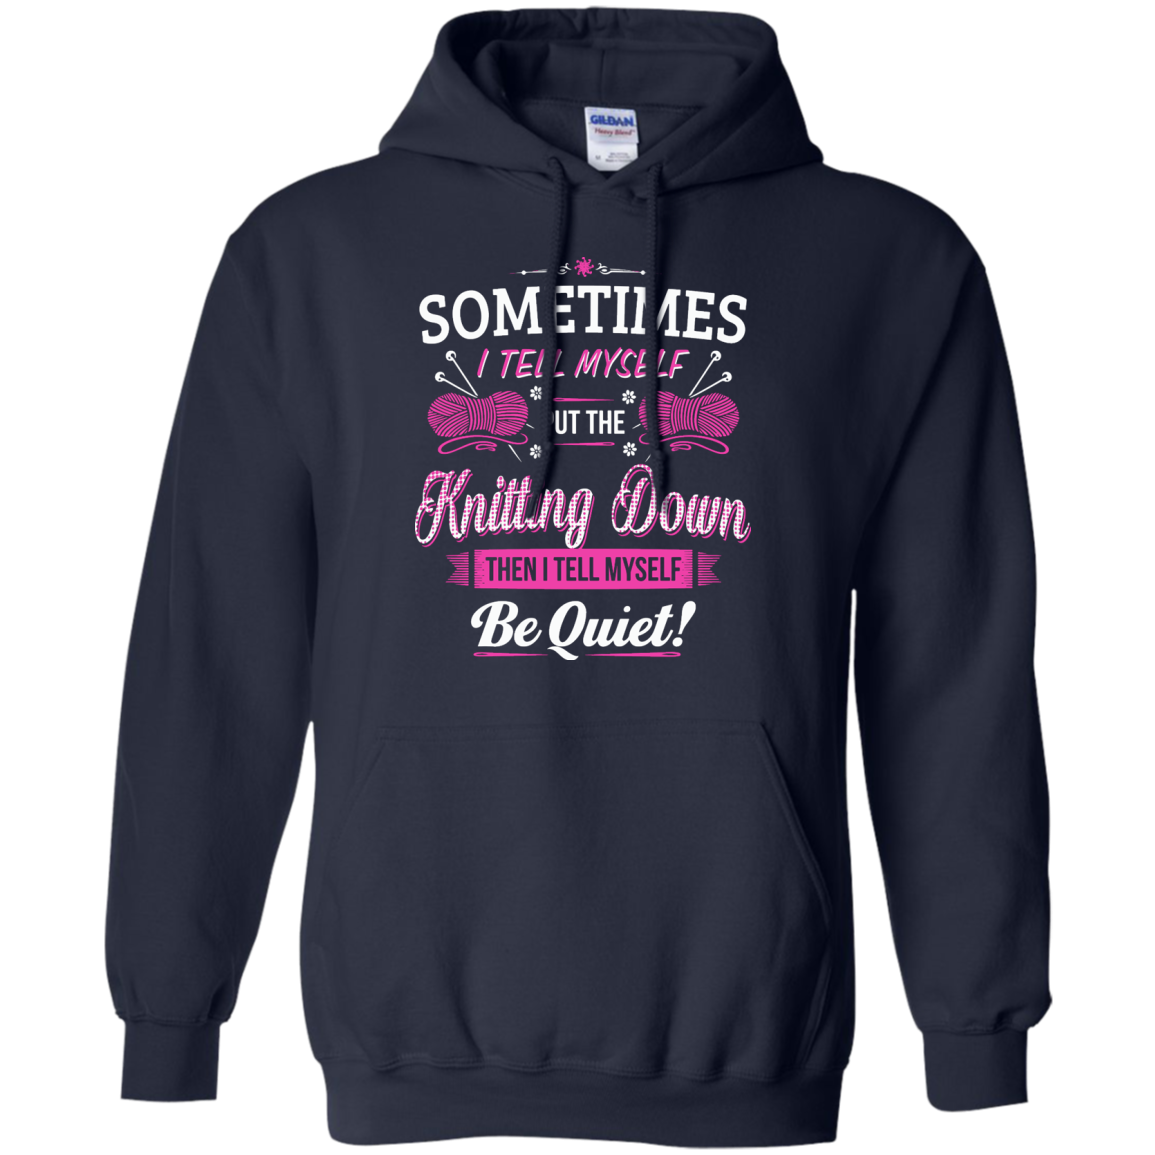 Put the Knitting Down Pullover Hoodies - Crafter4Life - 4